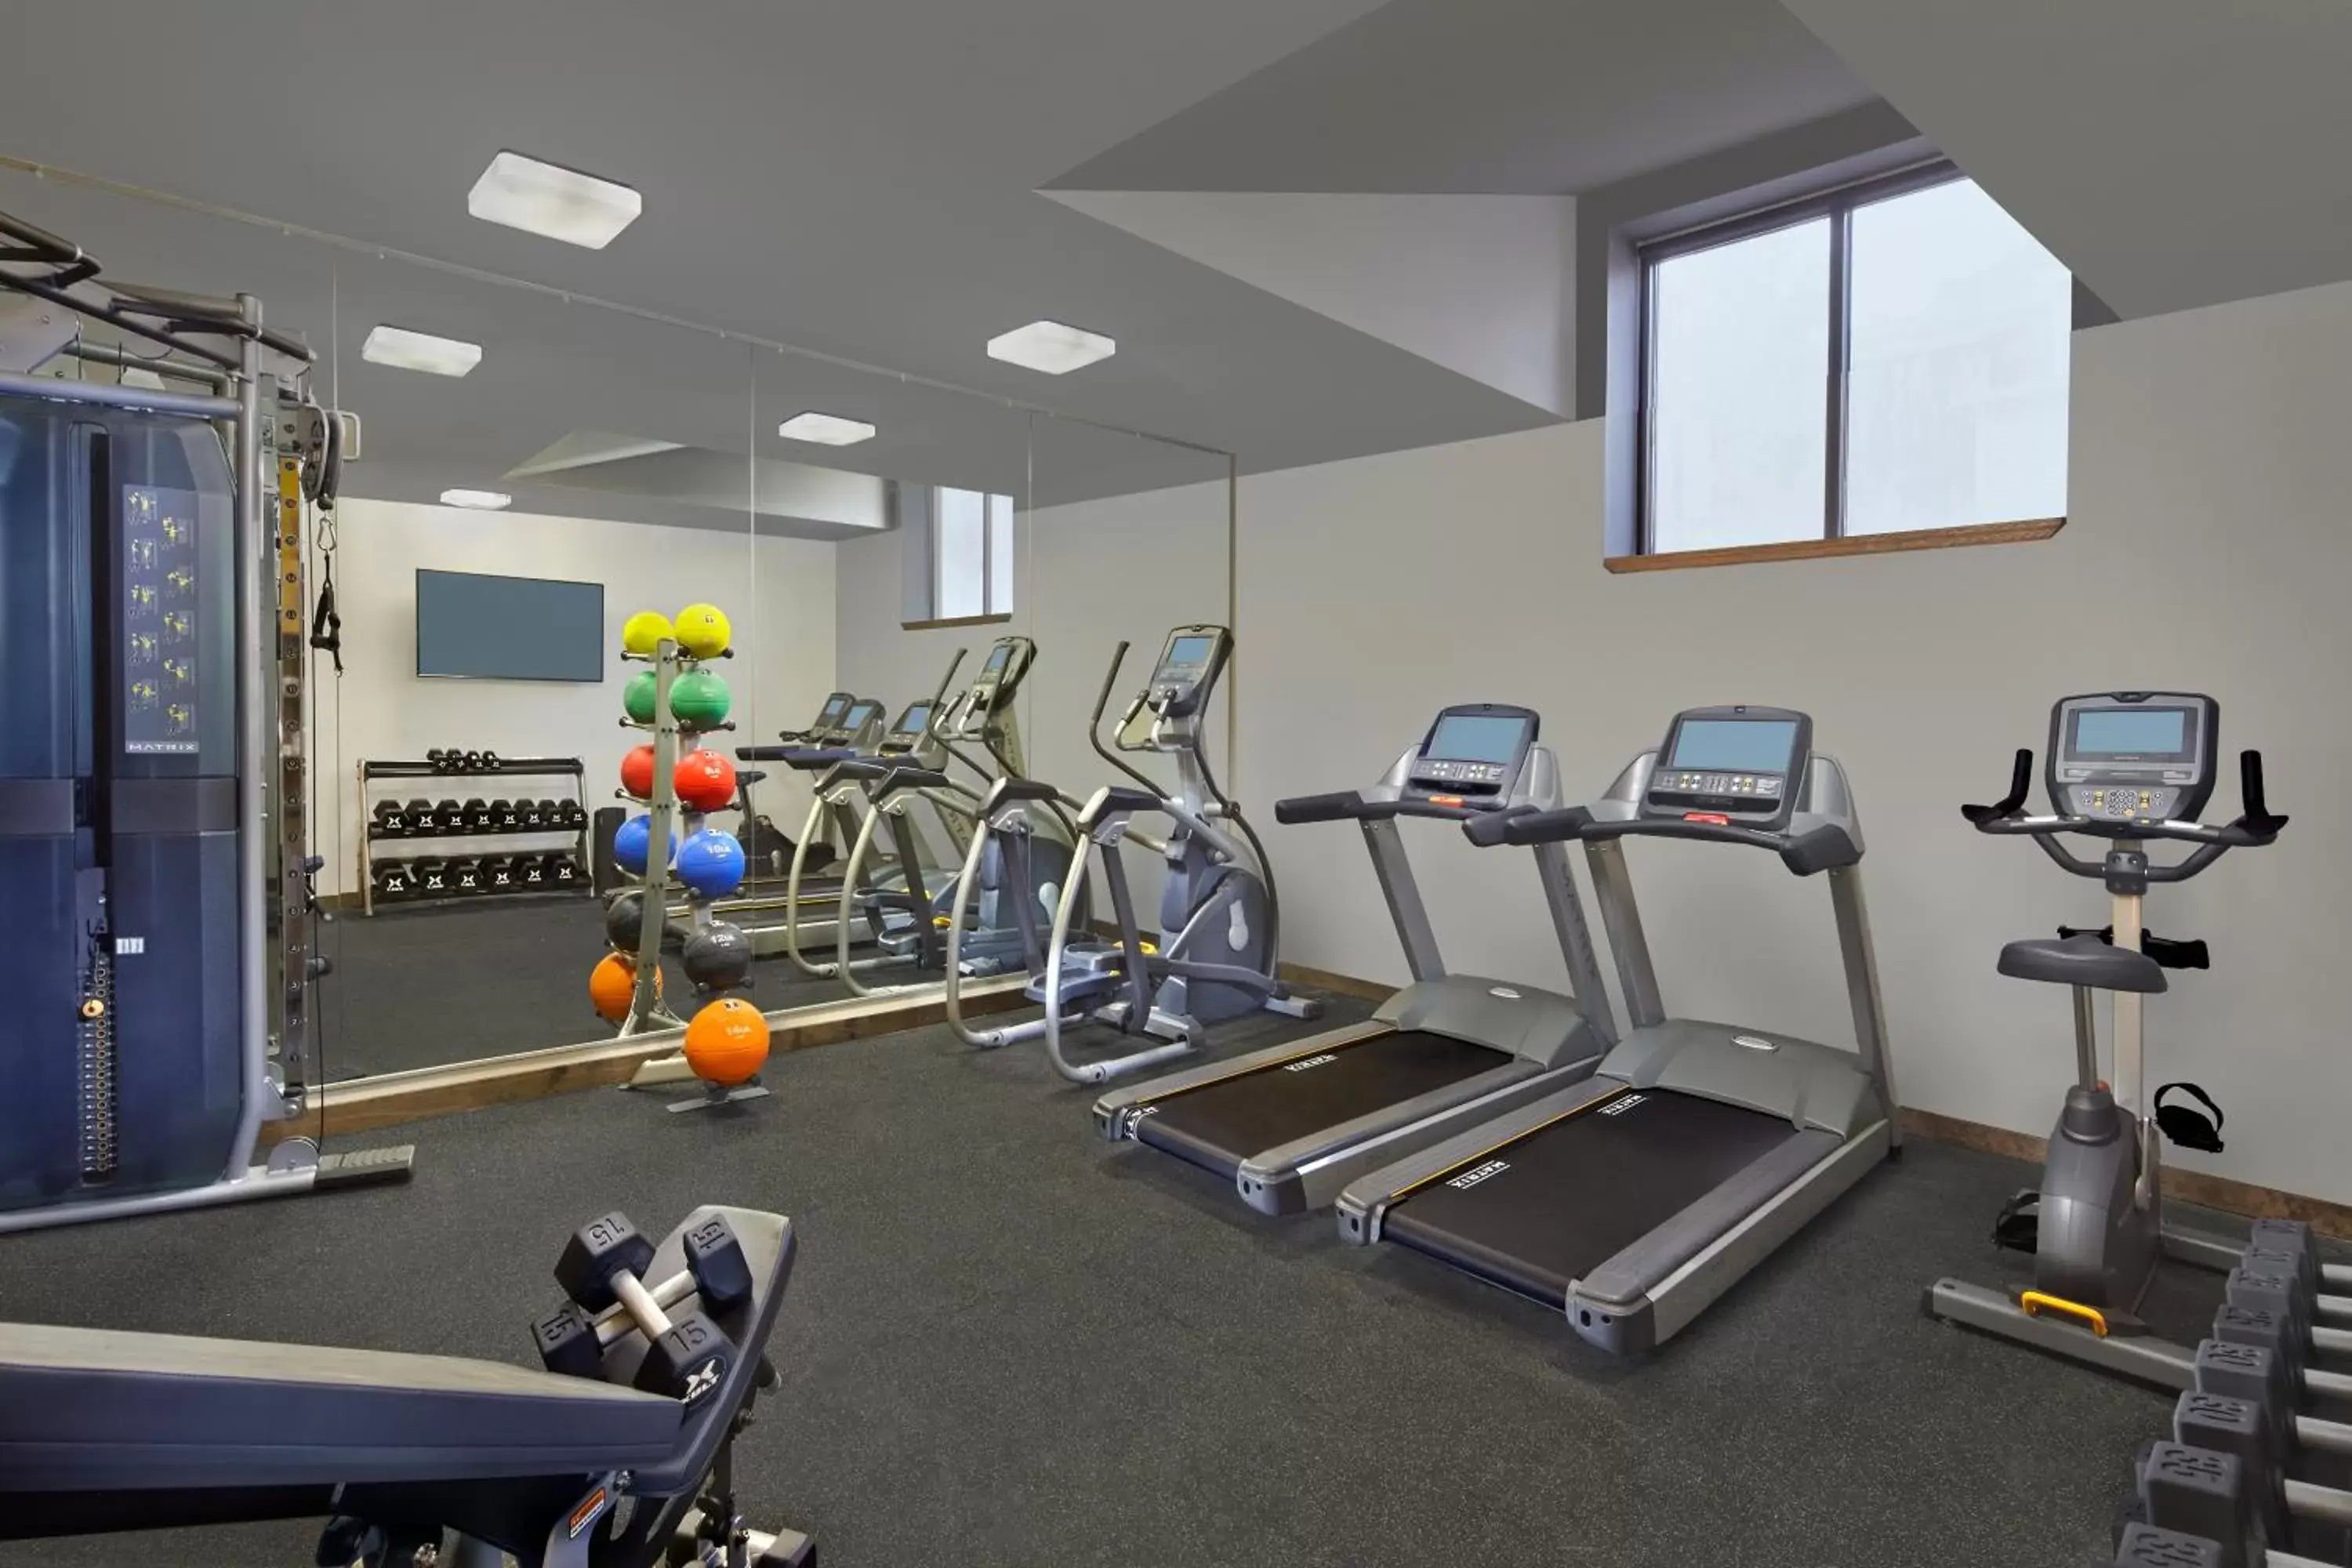 Fitness centre/facilities, Fitness Center/Facilities in Scholar Morgantown, Tapestry Collection by Hilton